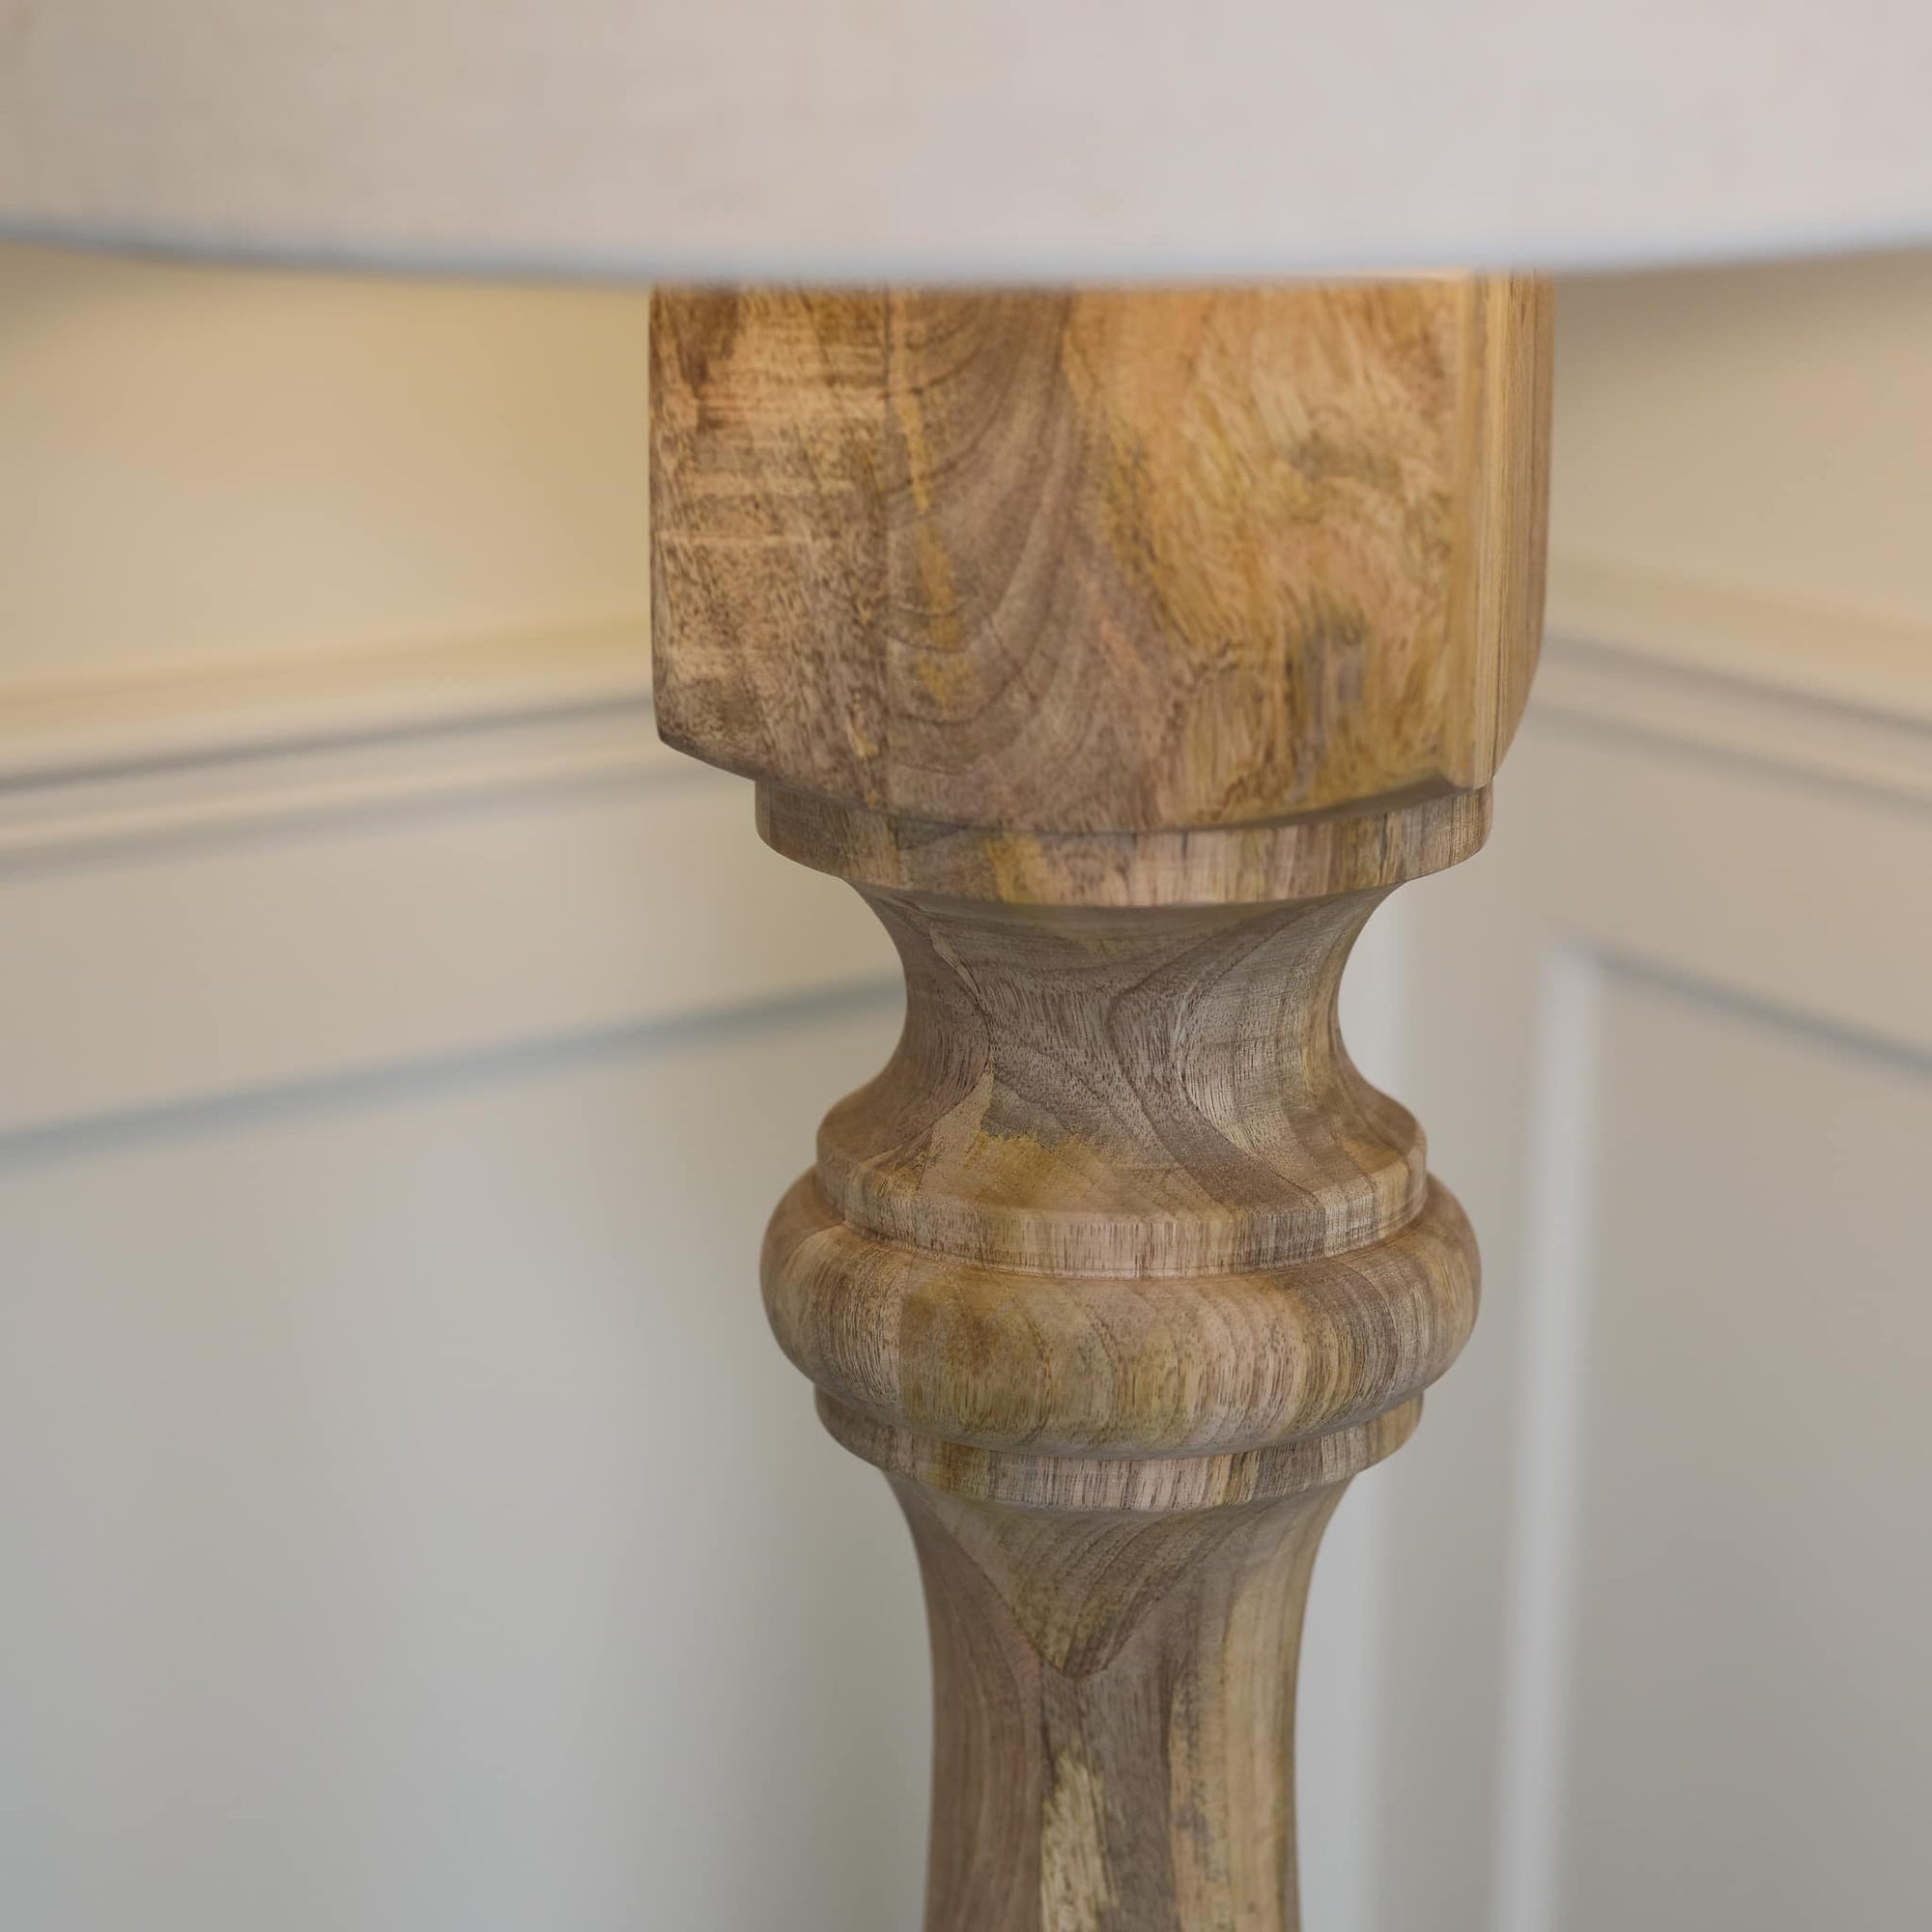 Close up of wooden grain on lamp base.